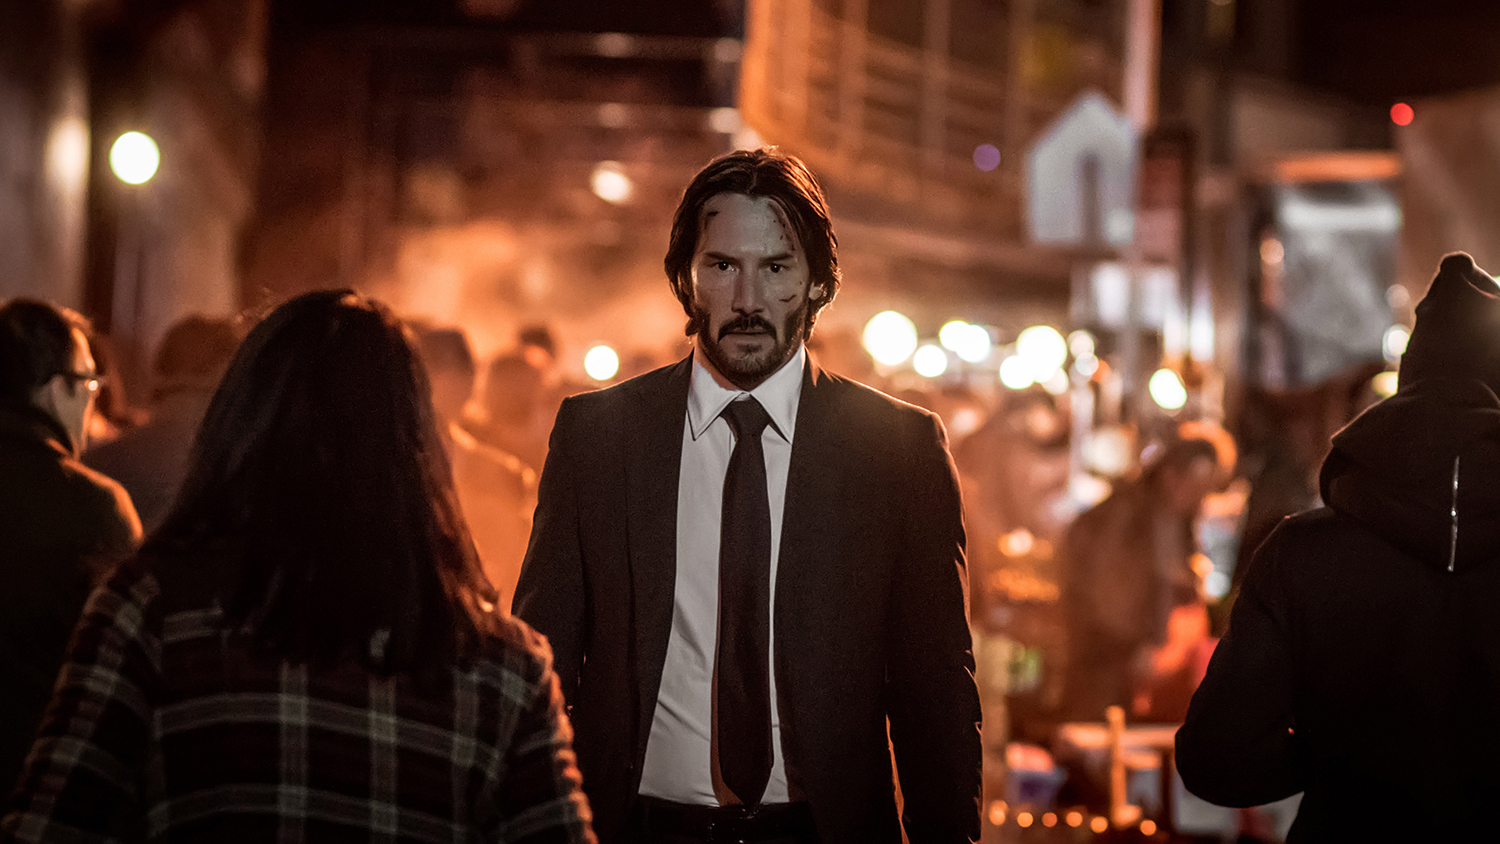 John Wick (2014): Where to Watch and Stream Online